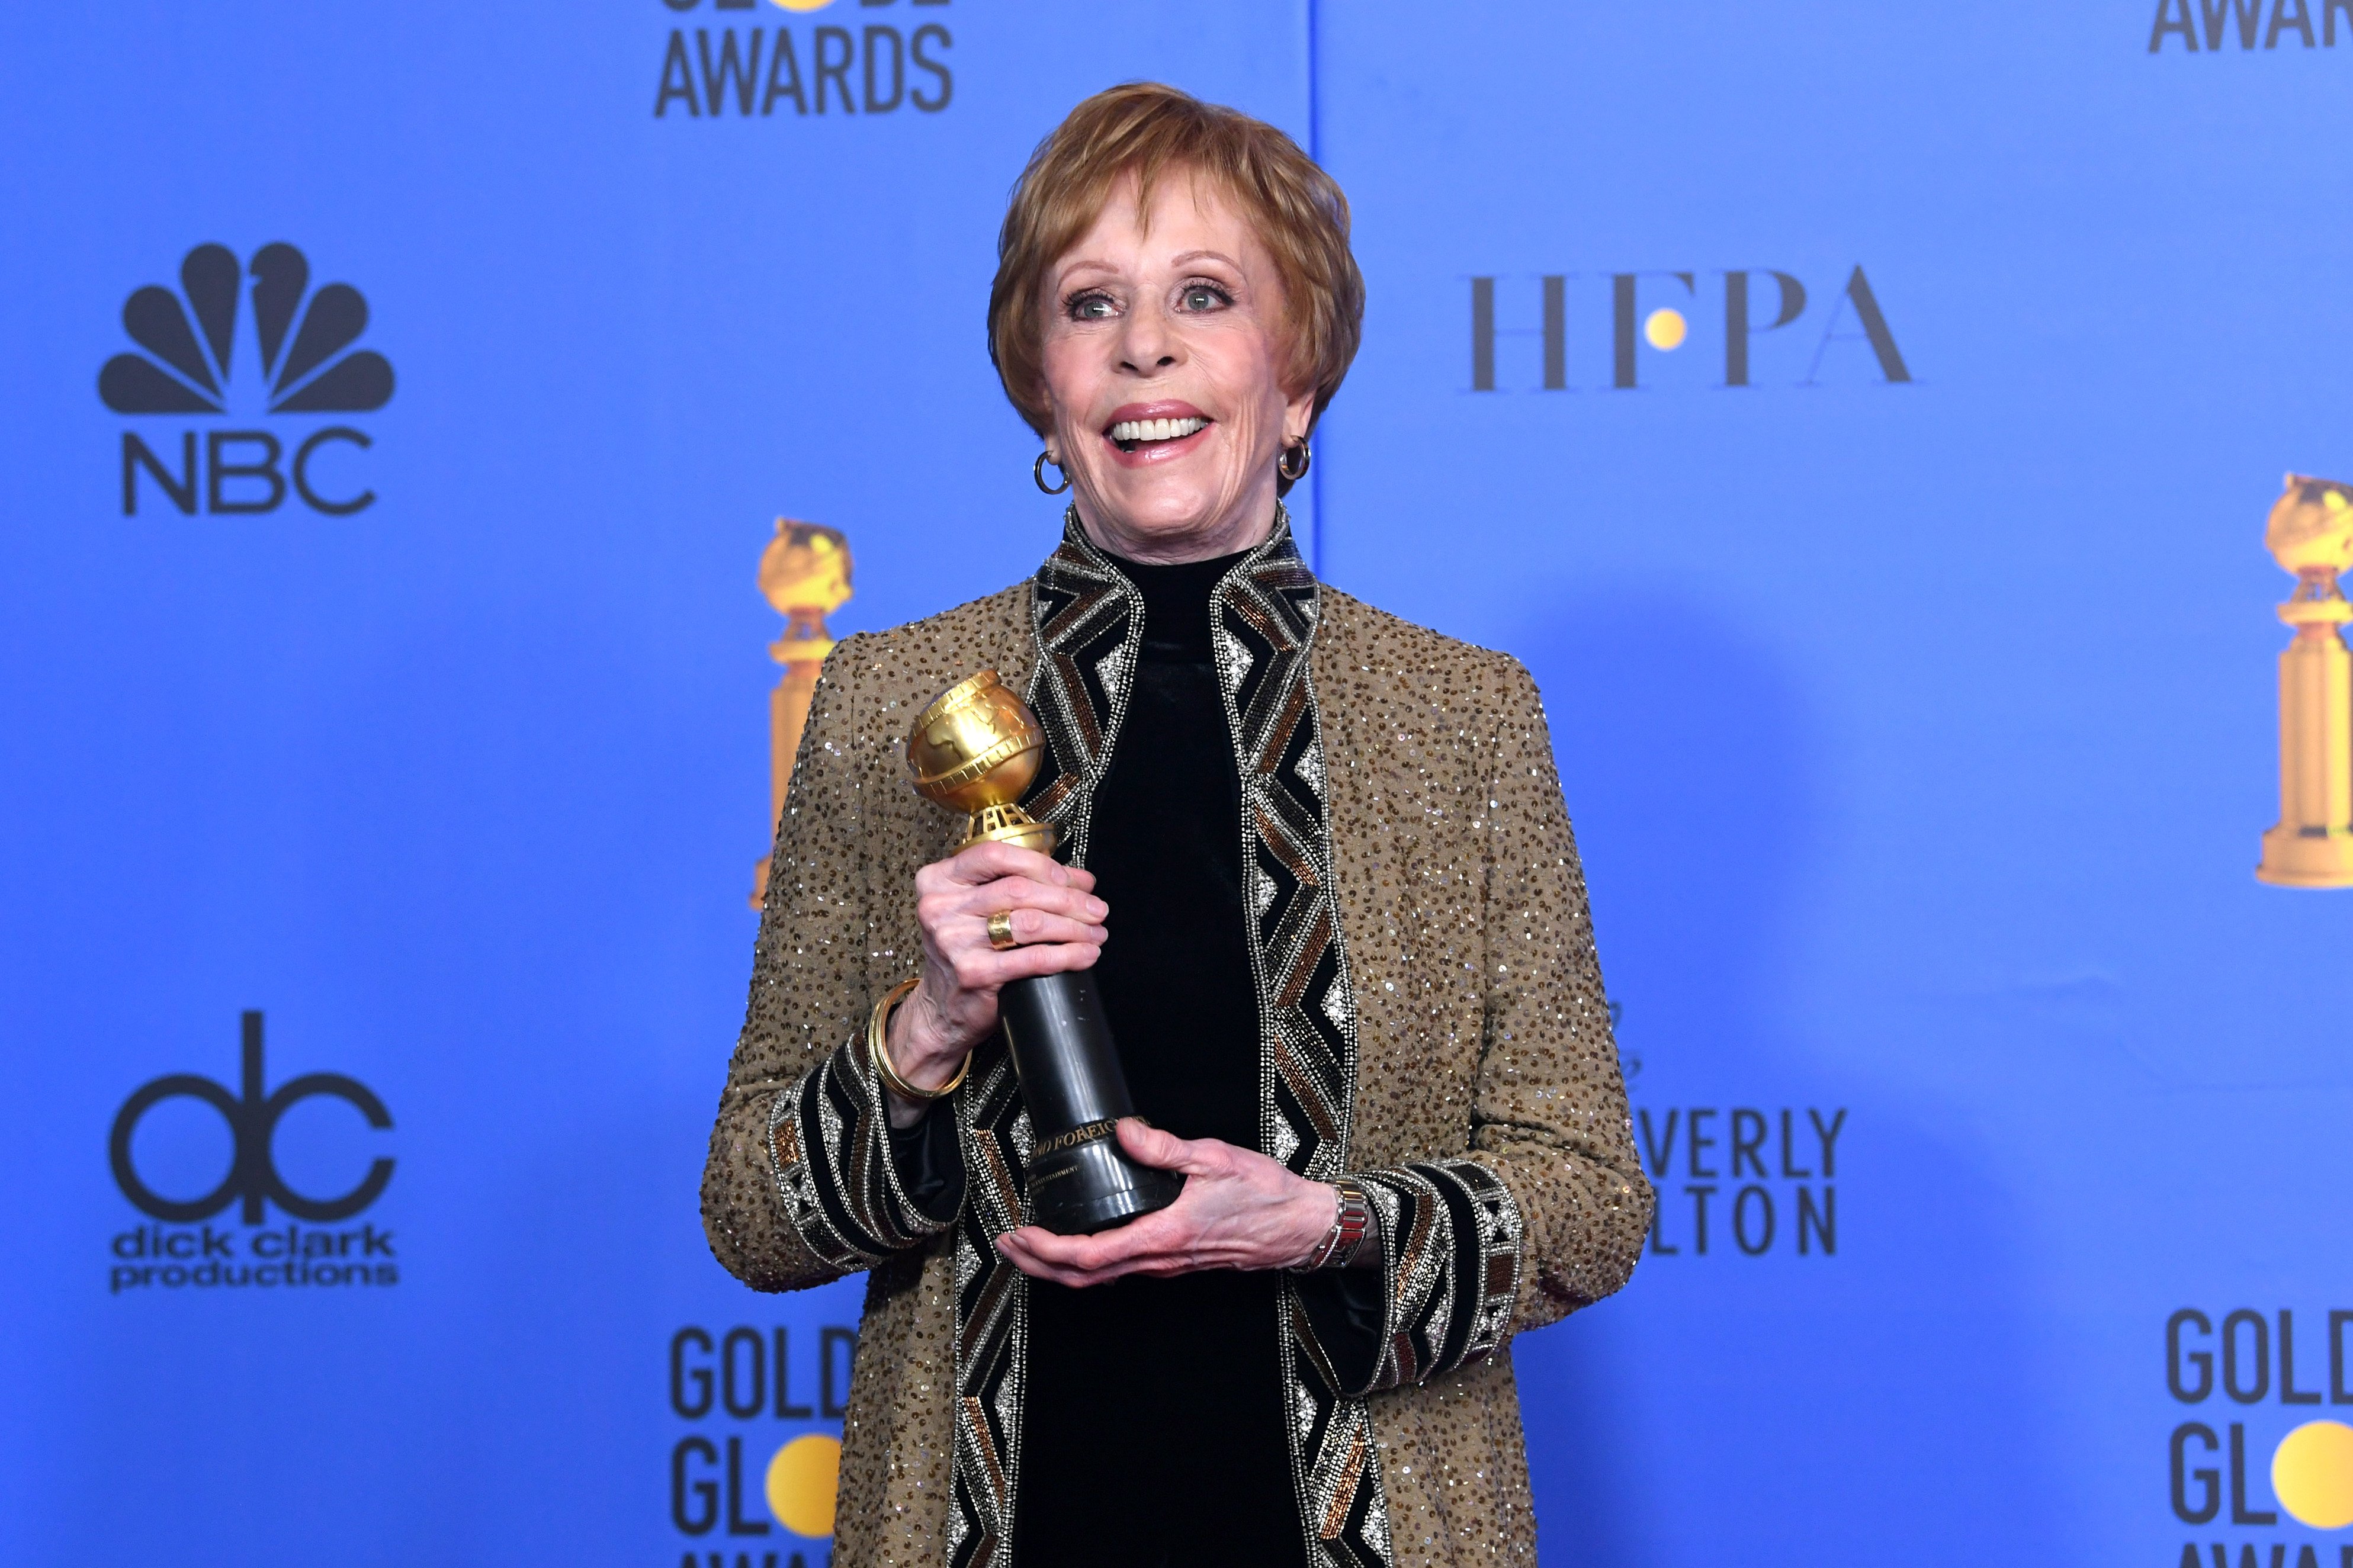 Carol Burnett at the 76th Annual Golden Globe Awards on January 6, 2019 | Photo: GettyImages